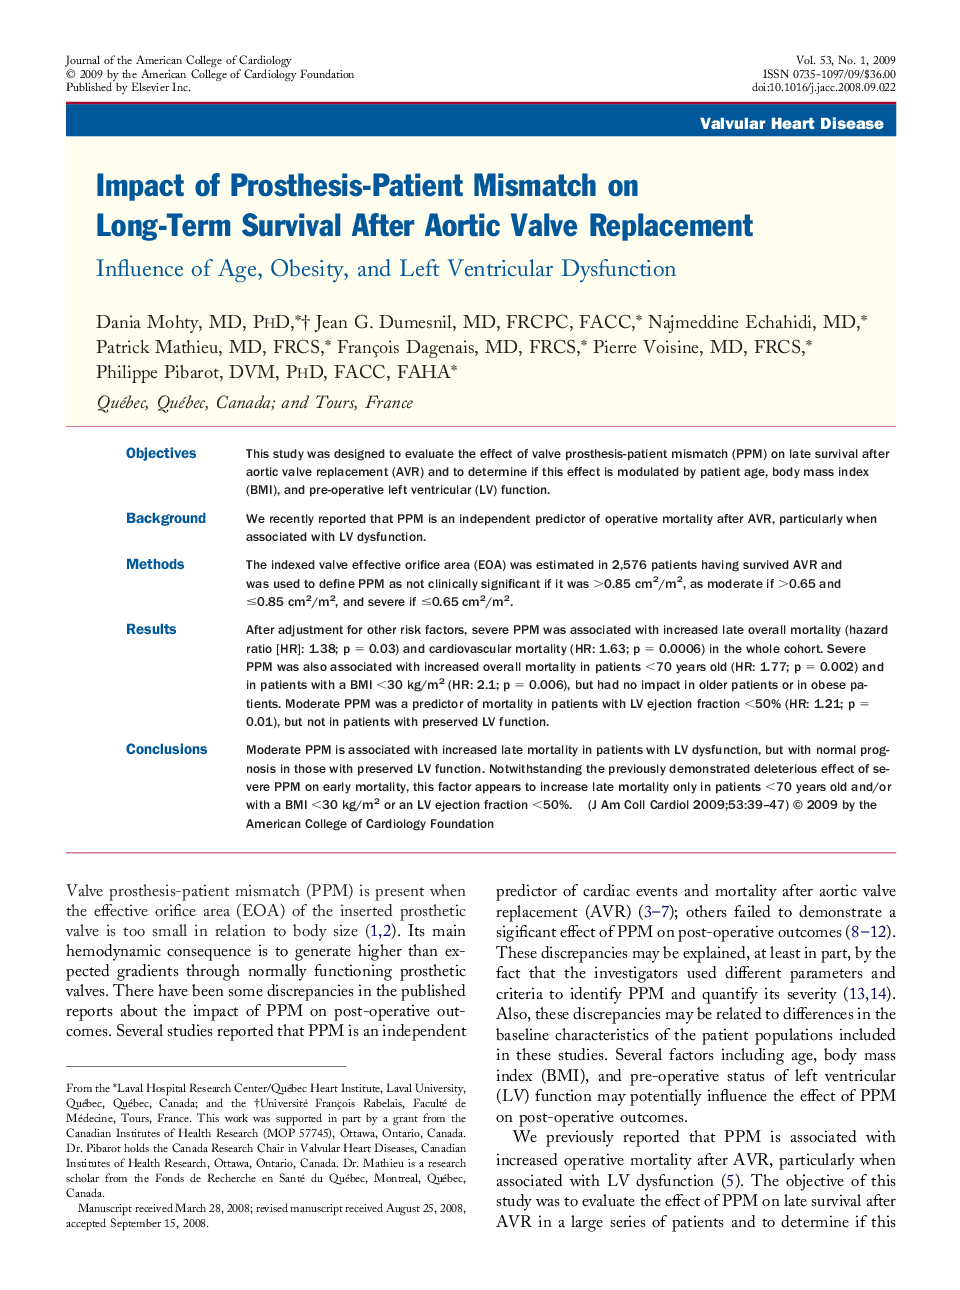 Impact of Prosthesis-Patient Mismatch on Long-Term Survival After Aortic Valve Replacement : Influence of Age, Obesity, and Left Ventricular Dysfunction